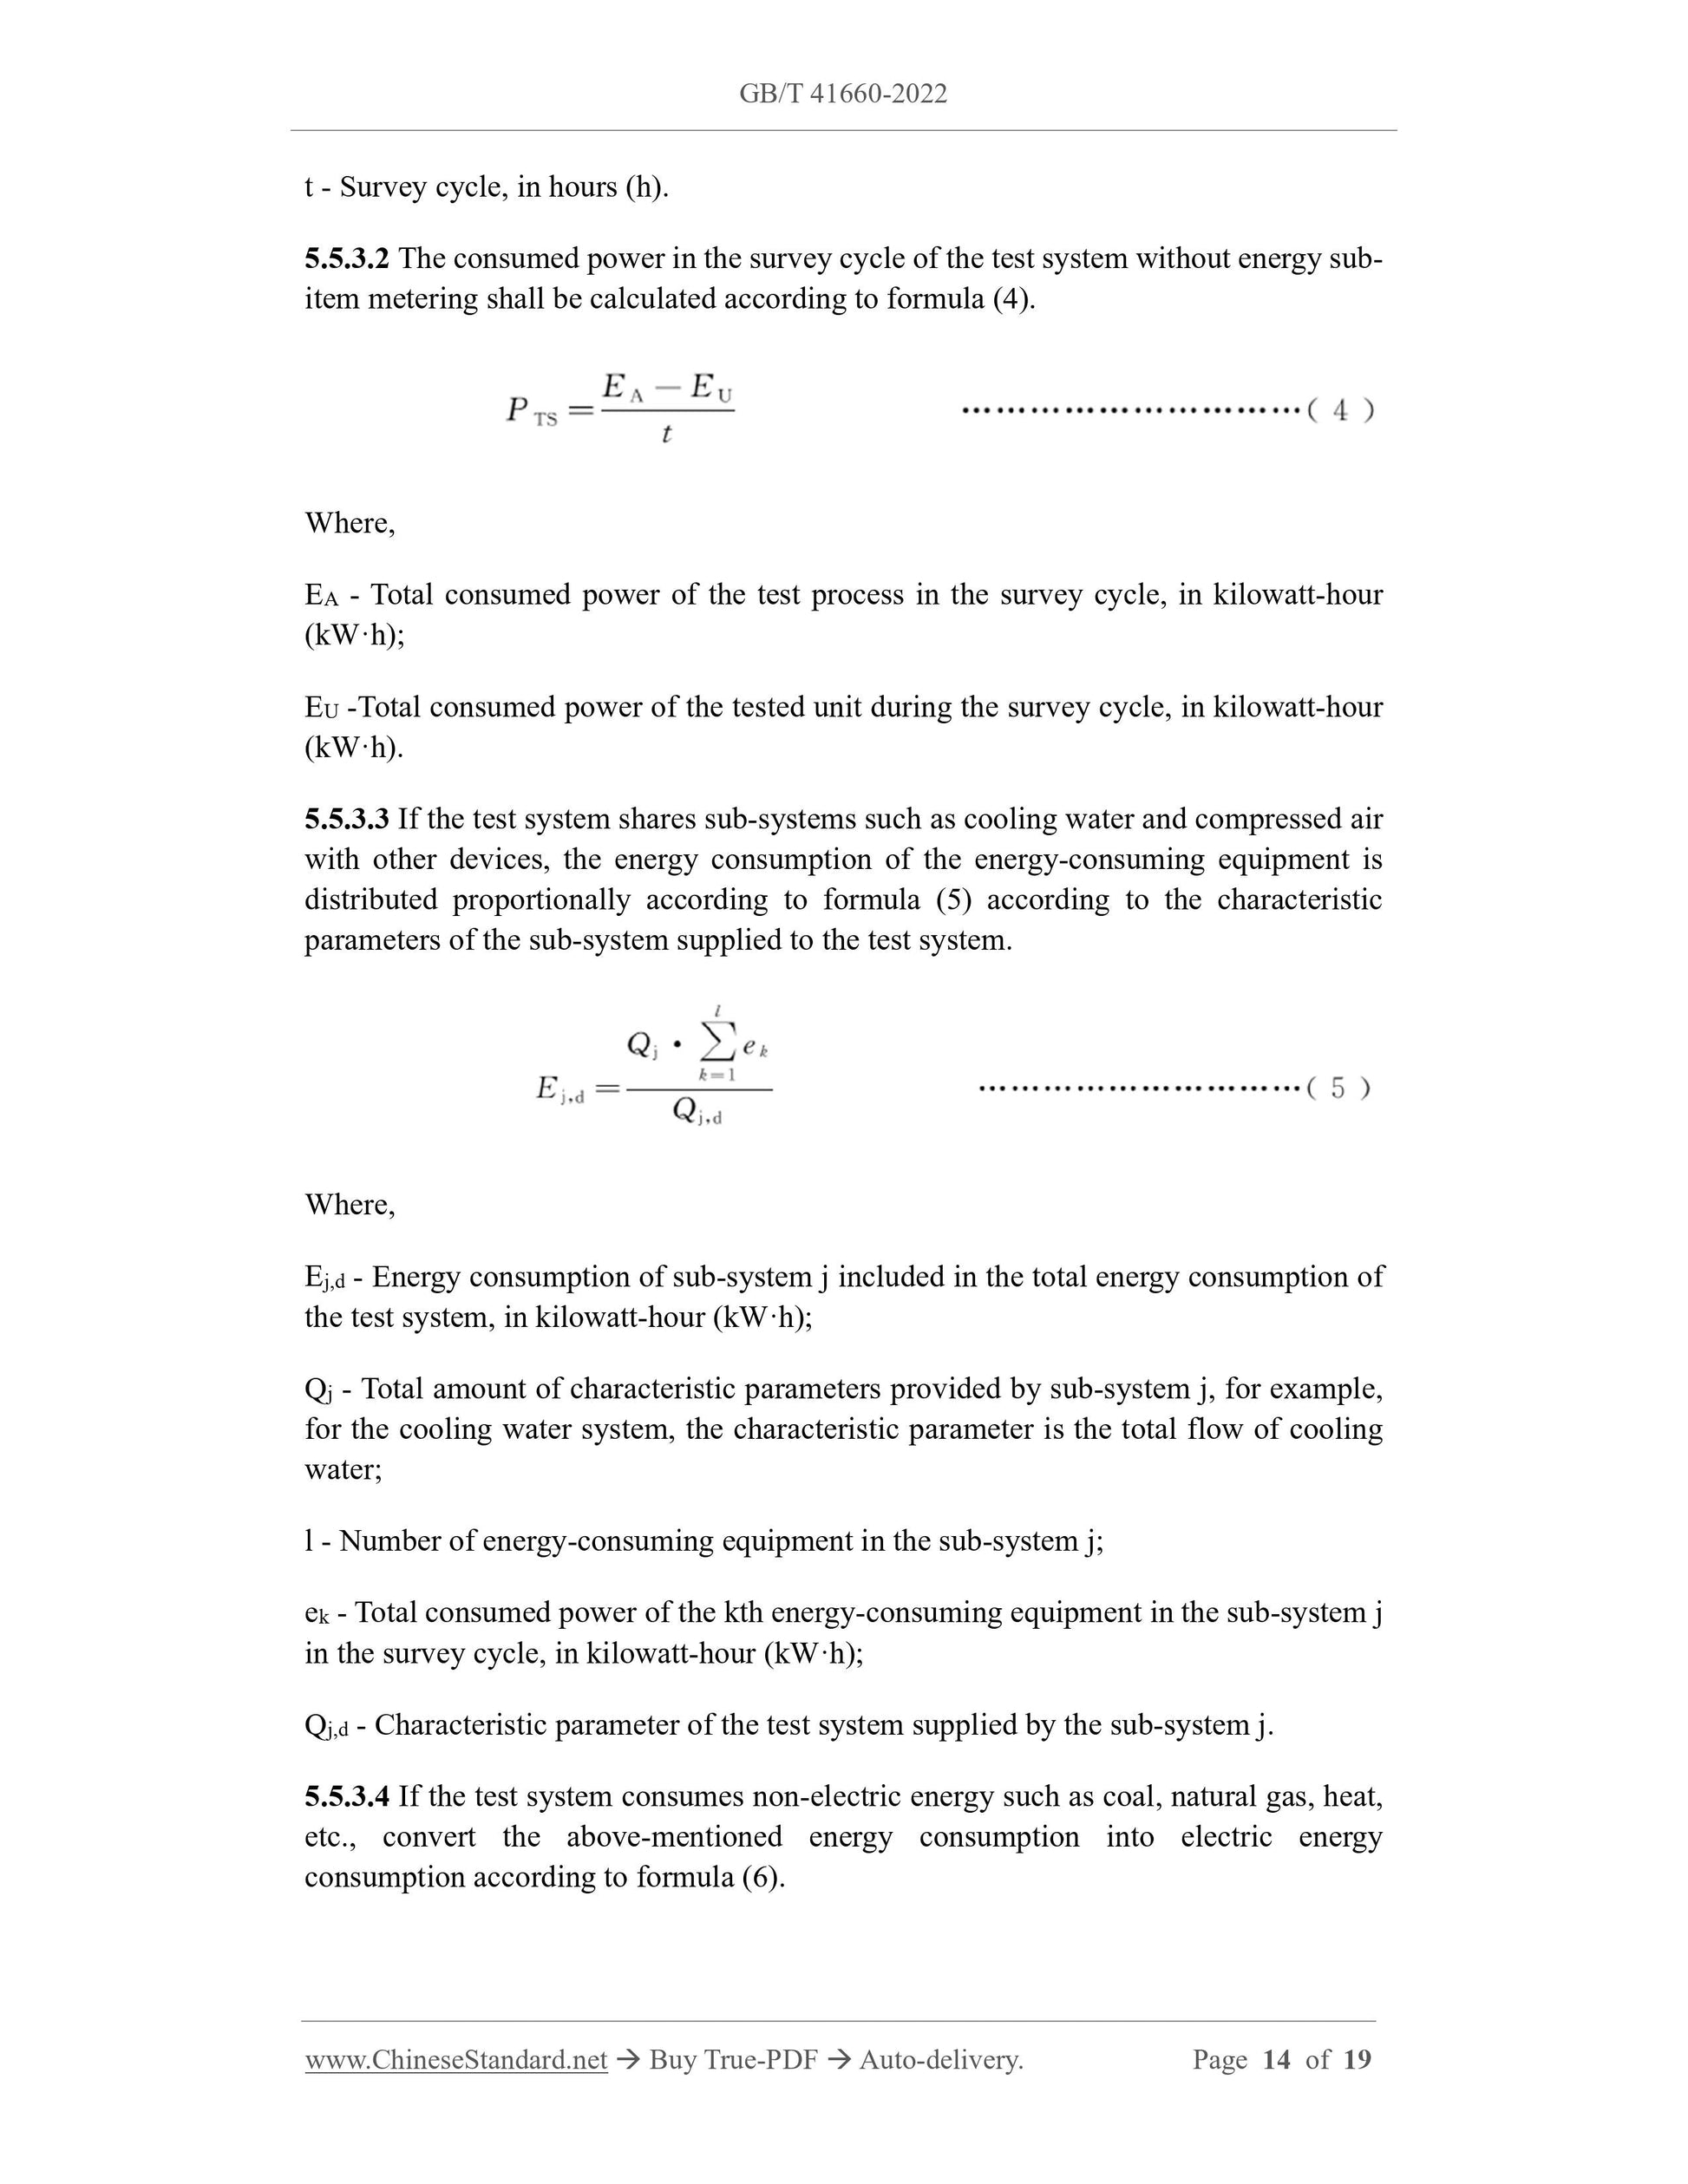 GB/T 41660-2022 Page 8